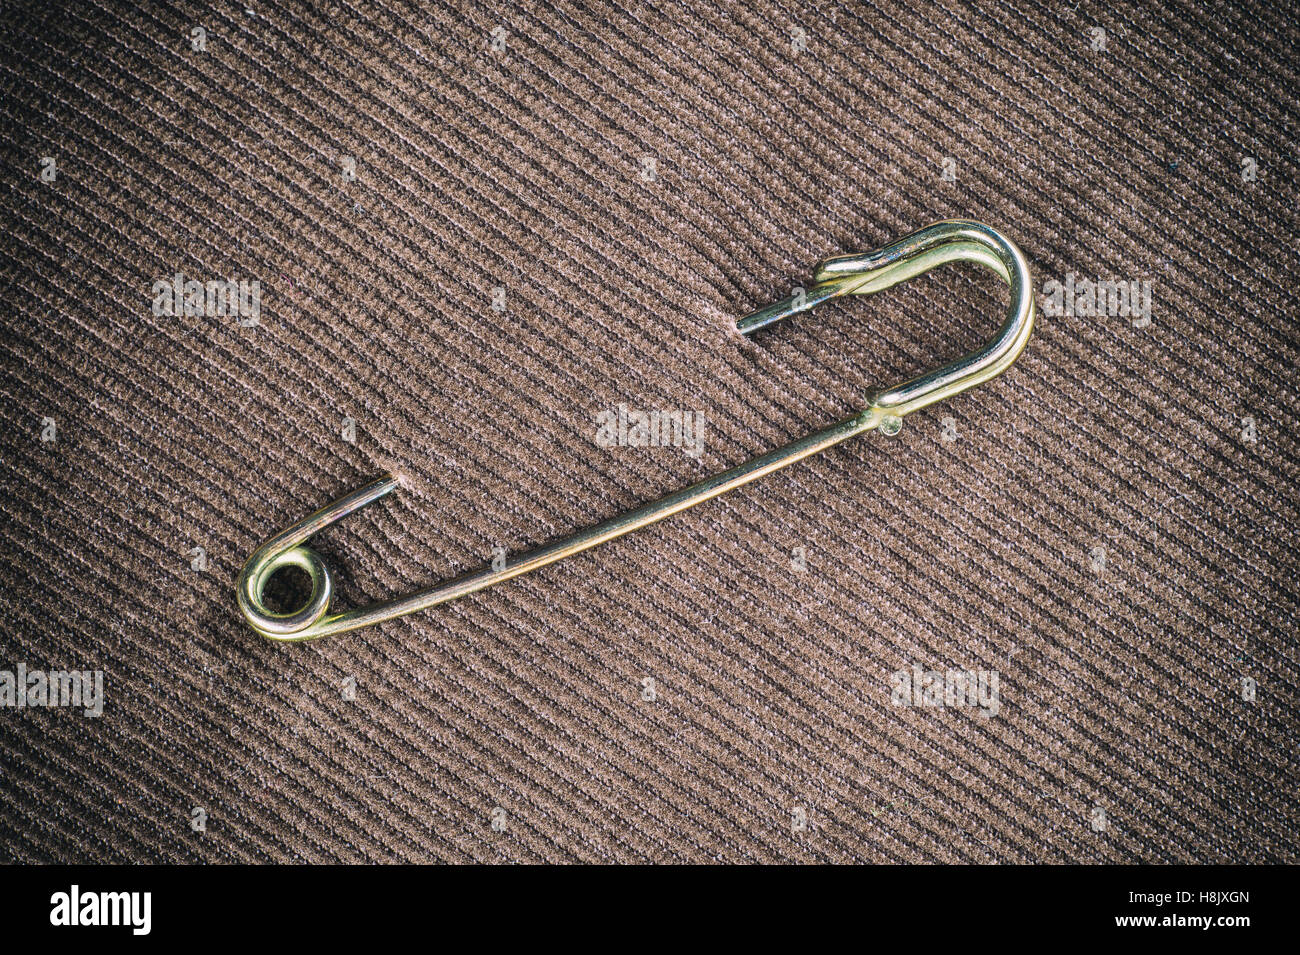 Safety pin on clothes as a symbol of solidarity Stock Photo